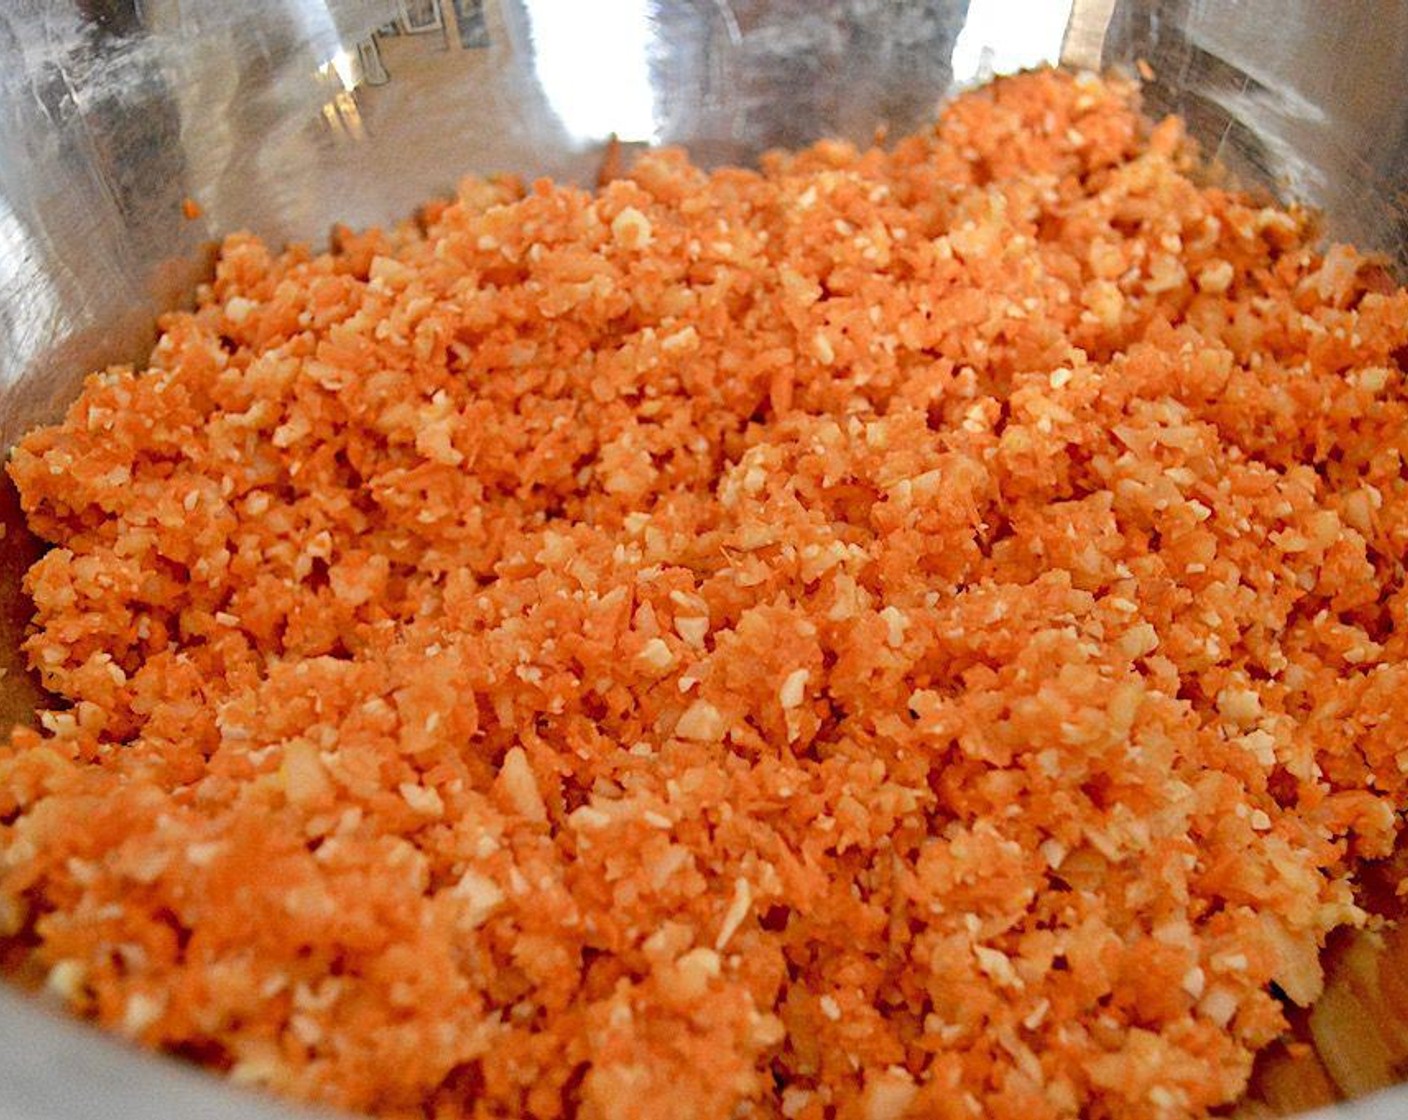 step 4 While the quinoa is cooking and cooling, combine Carrots (2 cups), Apples (2), Garlic (2 cloves), Onion (1/2), Fresh Sage (1 Tbsp), and Smoked Gouda (1 cup) in the bowl of a food processor and pulse it all together.